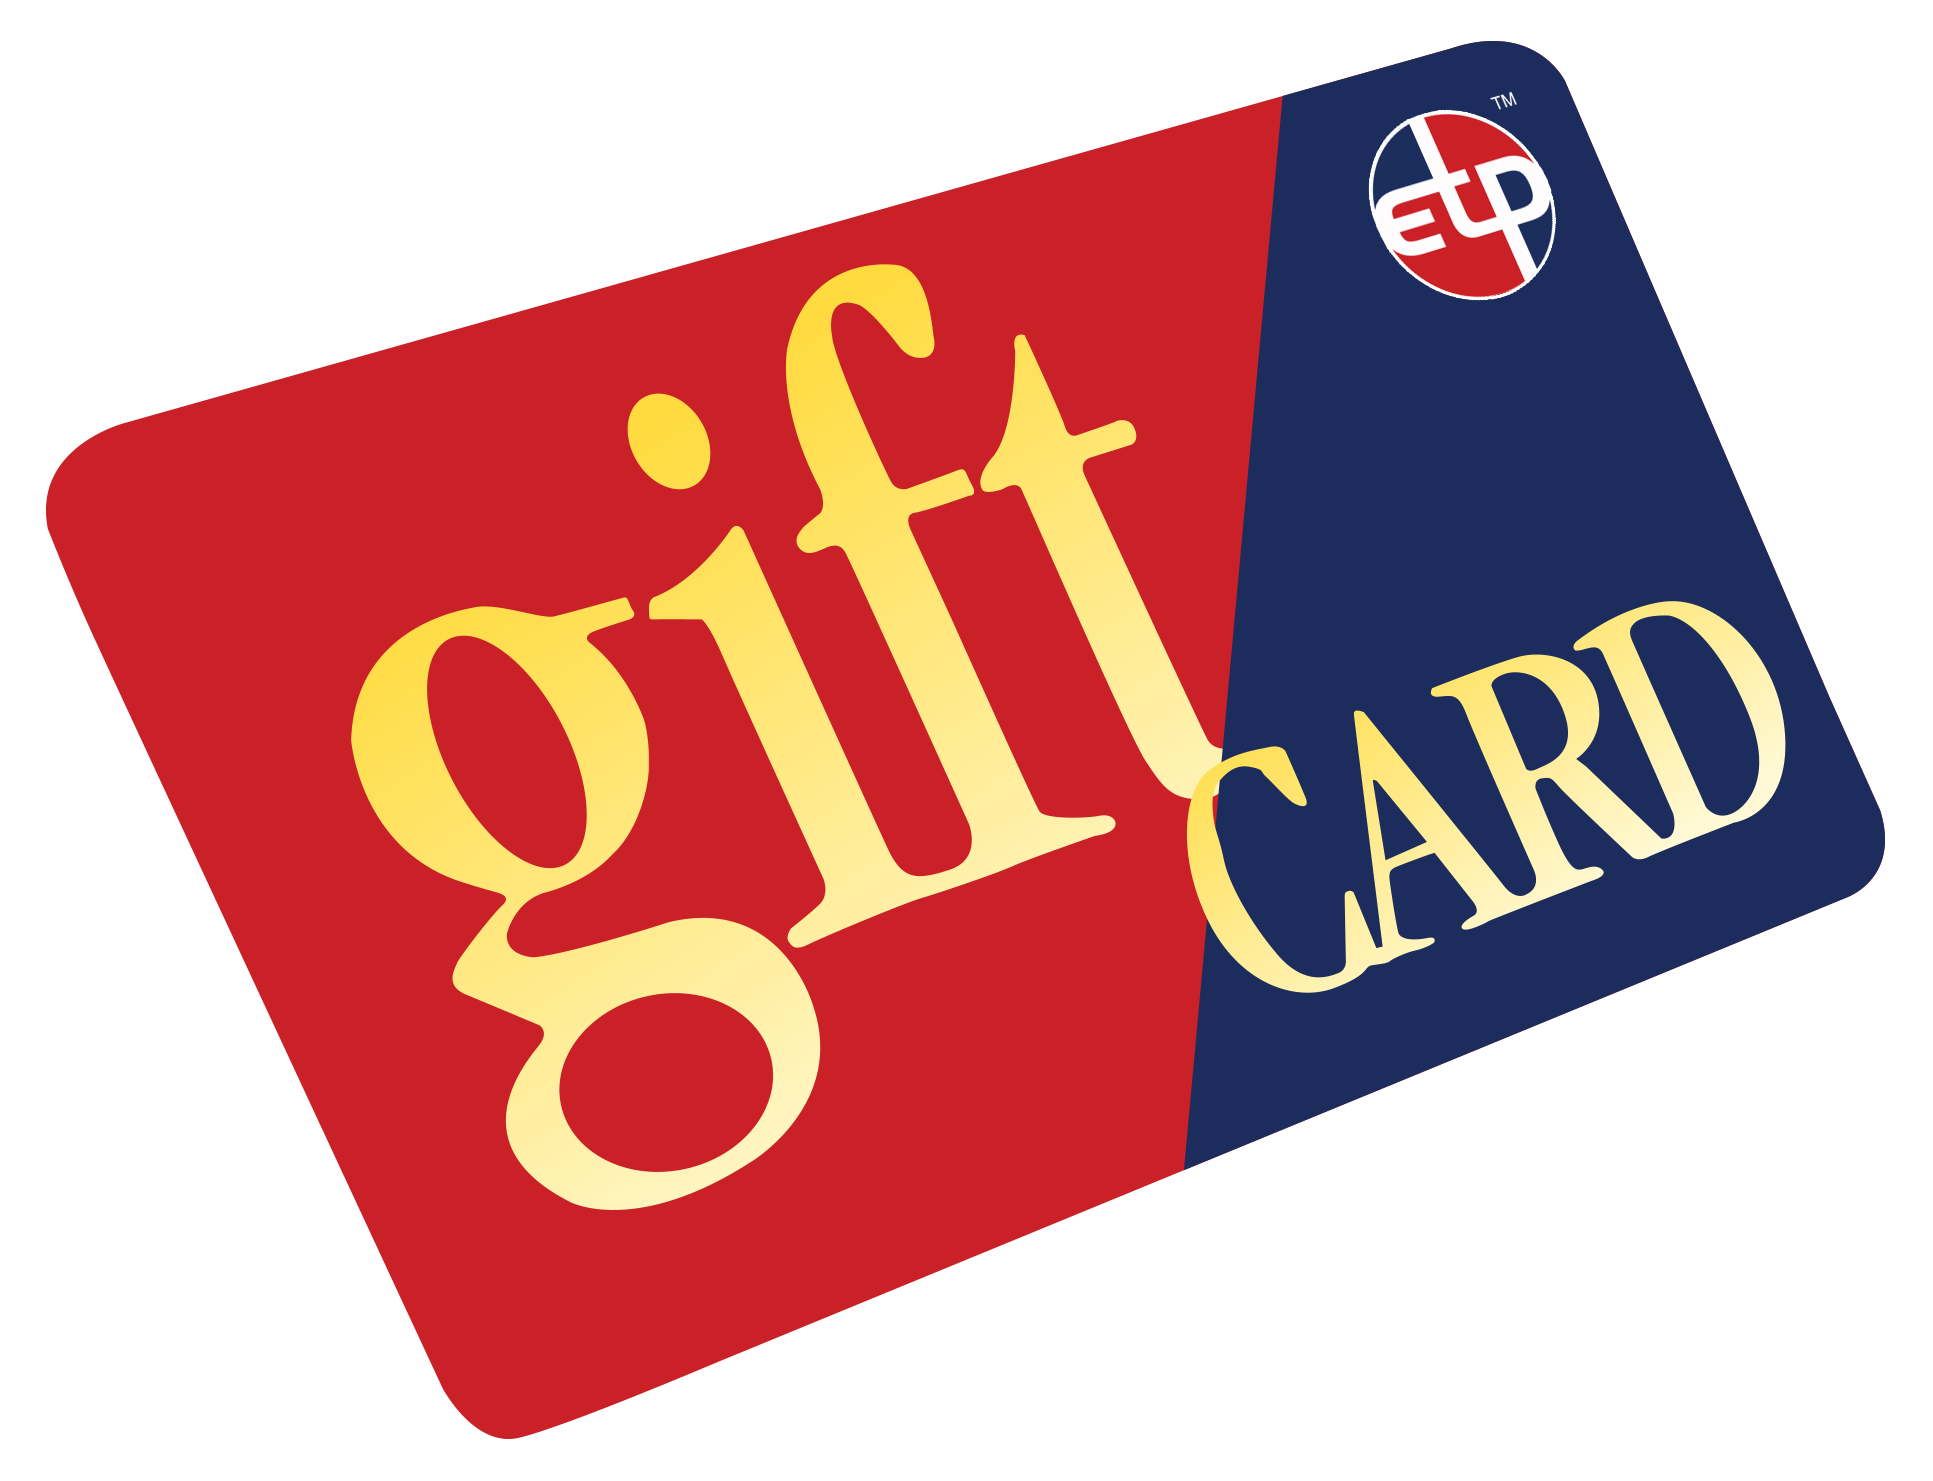 Gift Cards - The Perfect Stocking Stuffer!